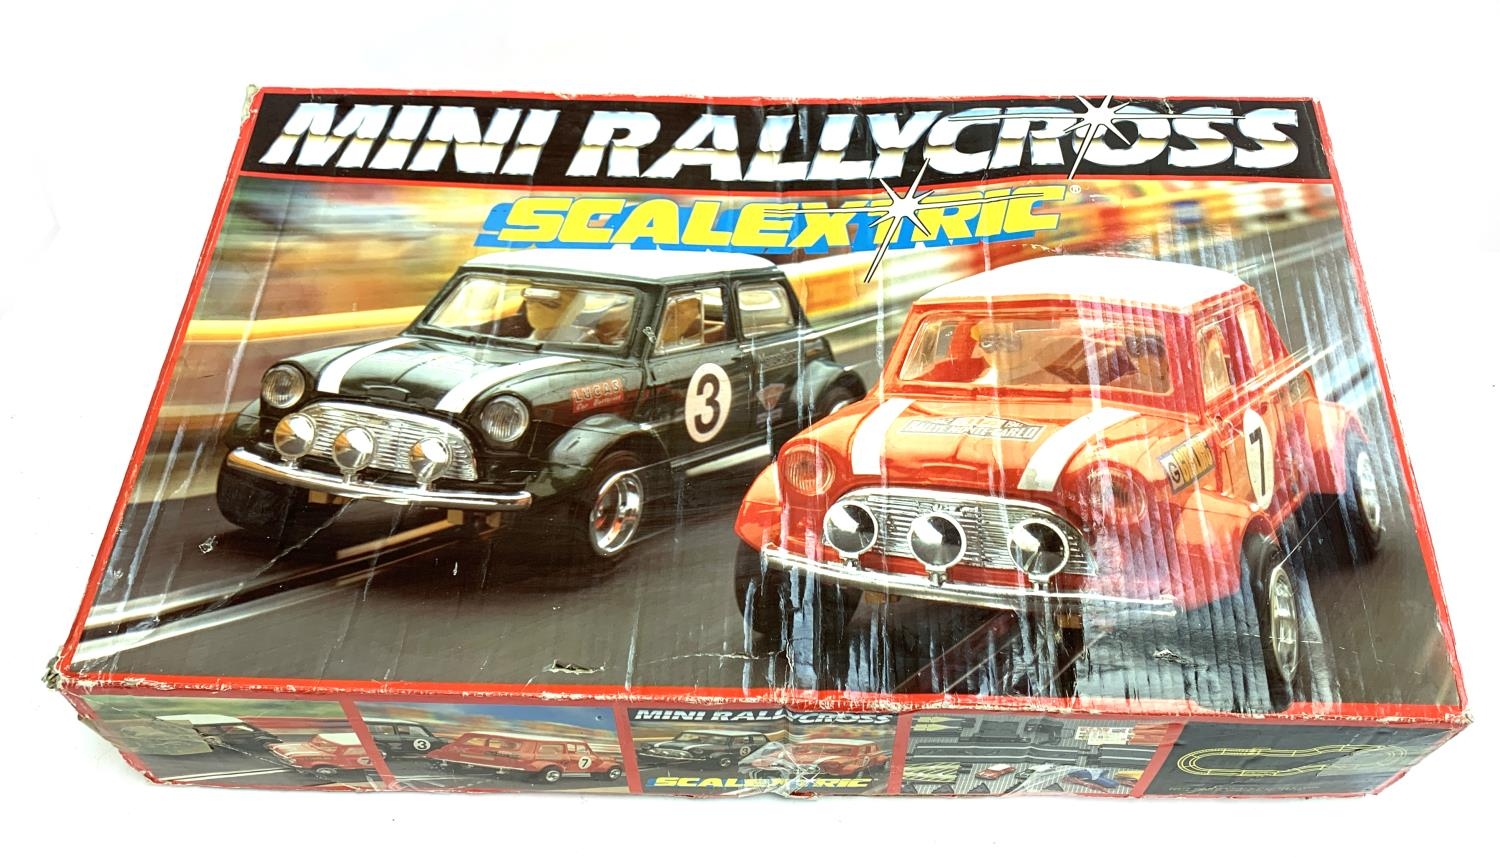 A Mini Rallycross scalextric set with minis, track, controllers etc